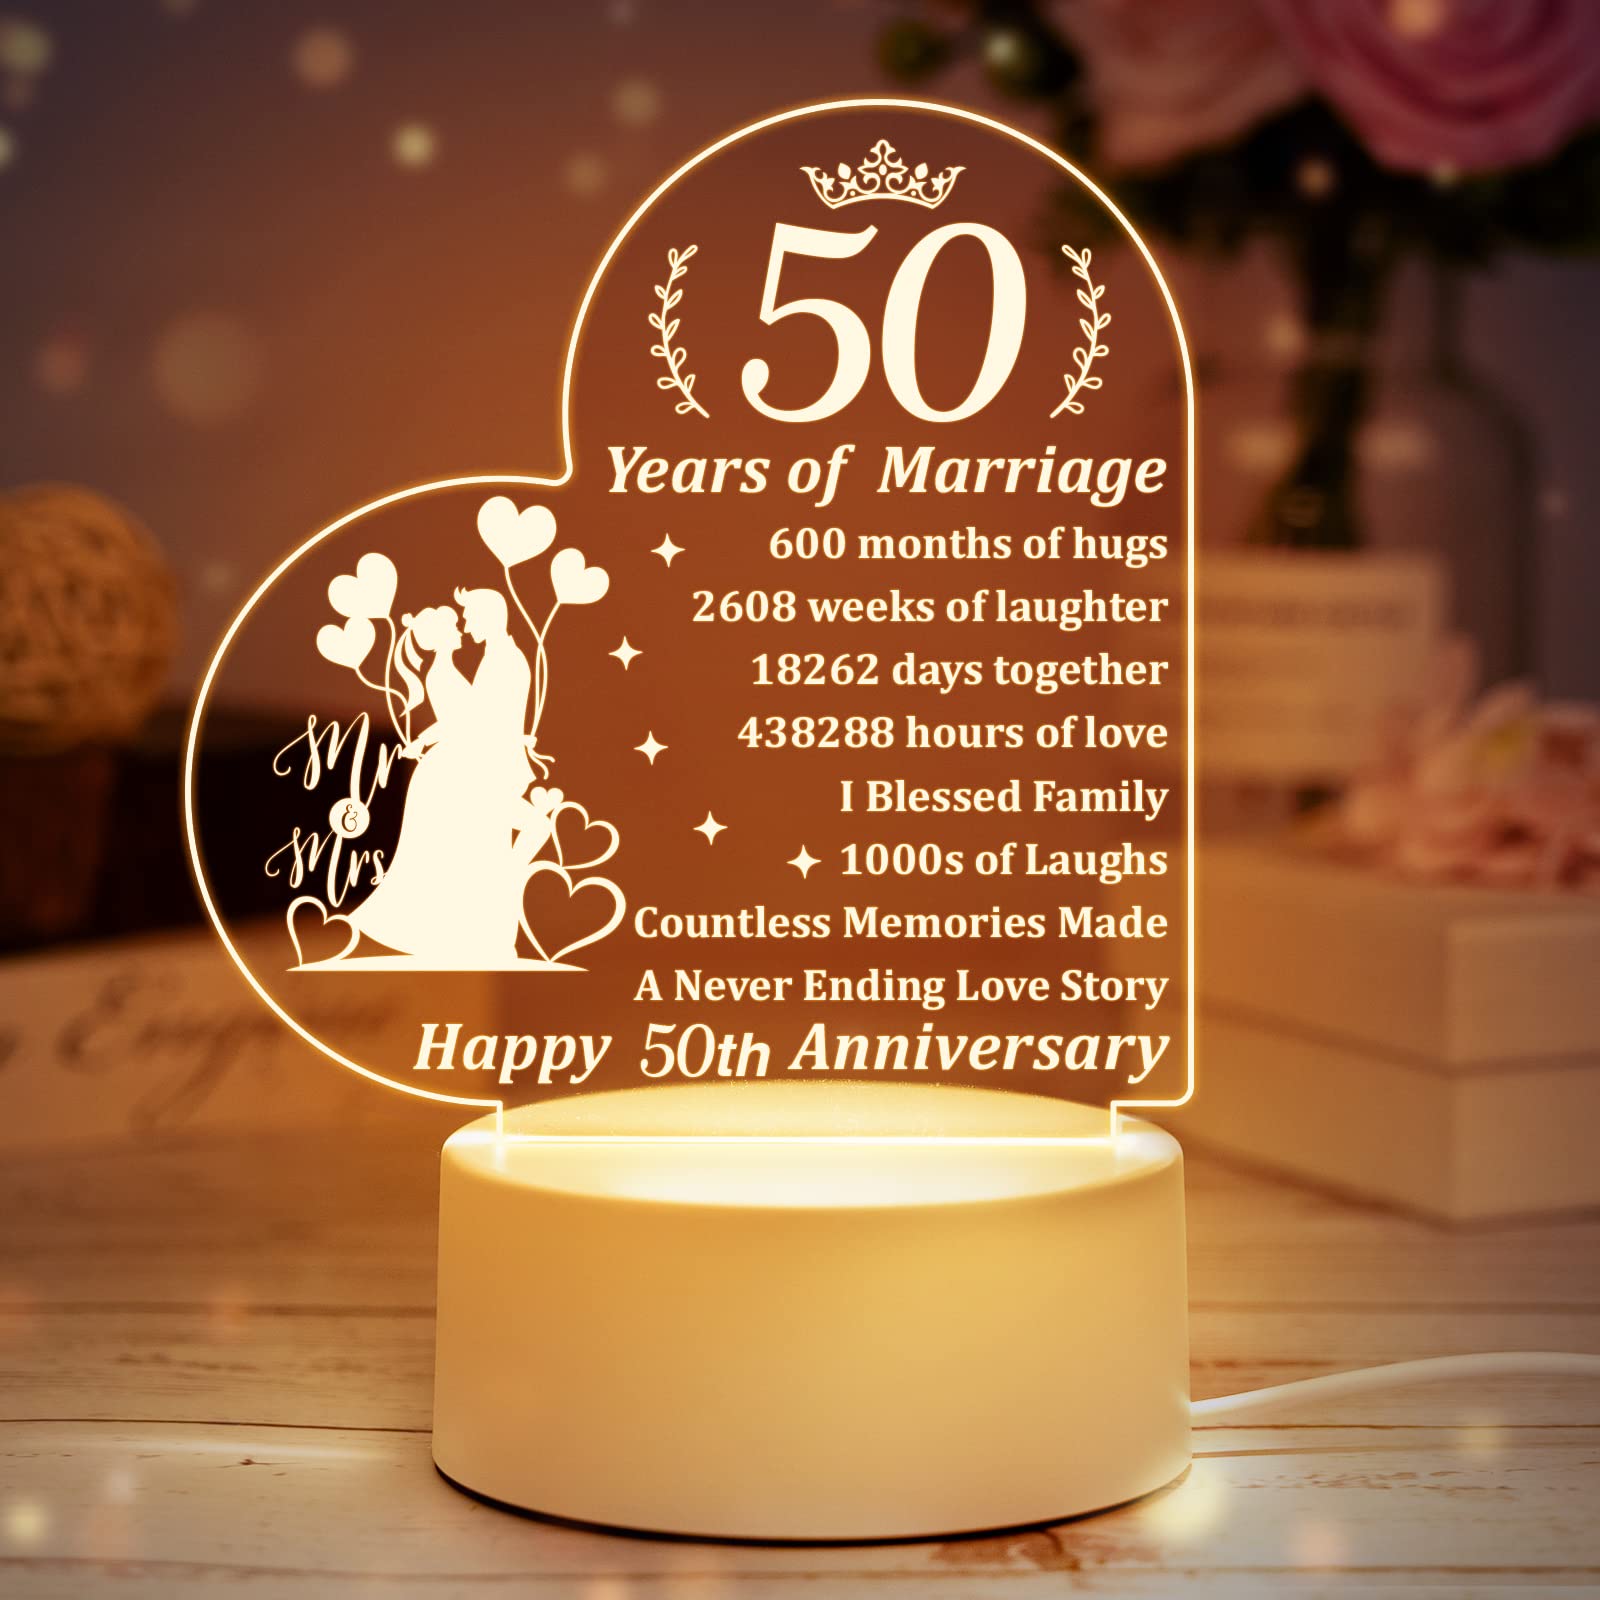 50 Anniversary Gifts - Ideas For Golden Couples | 50th anniversary gifts,  Golden anniversary gifts, 50 wedding anniversary gifts